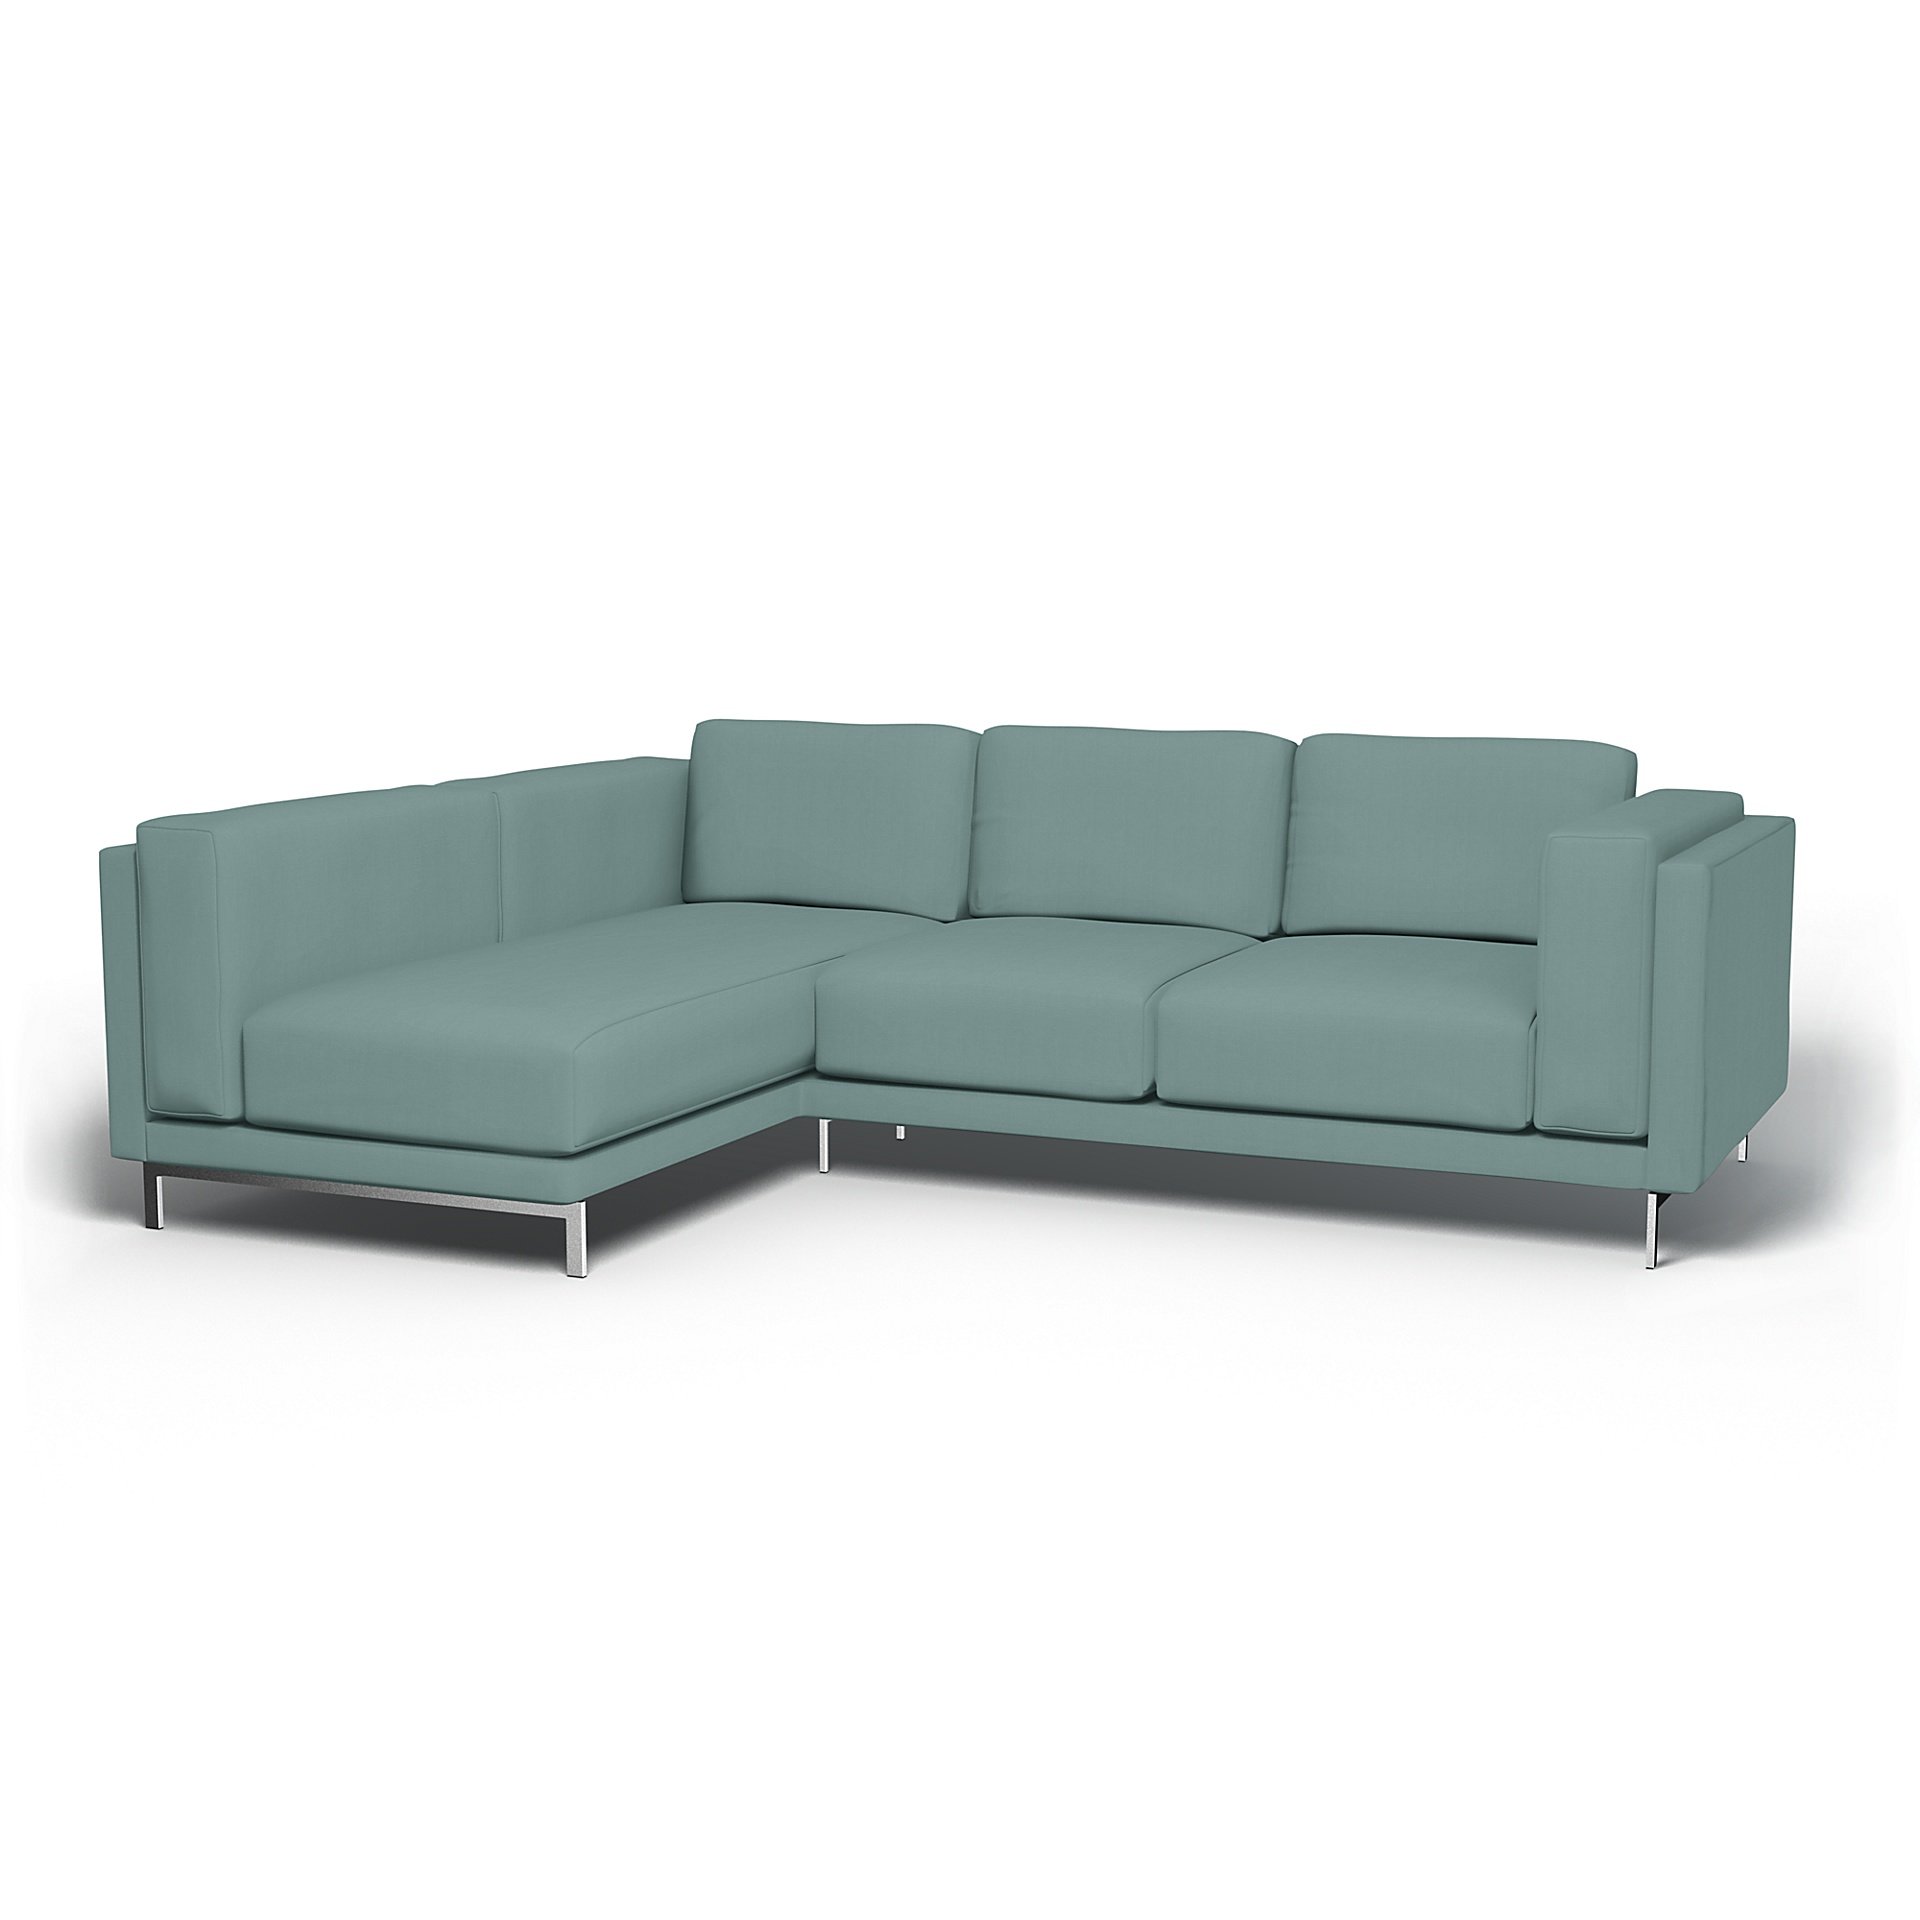 IKEA - Nockeby 3 Seater Sofa with Left Chaise Cover, Mineral Blue, Cotton - Bemz